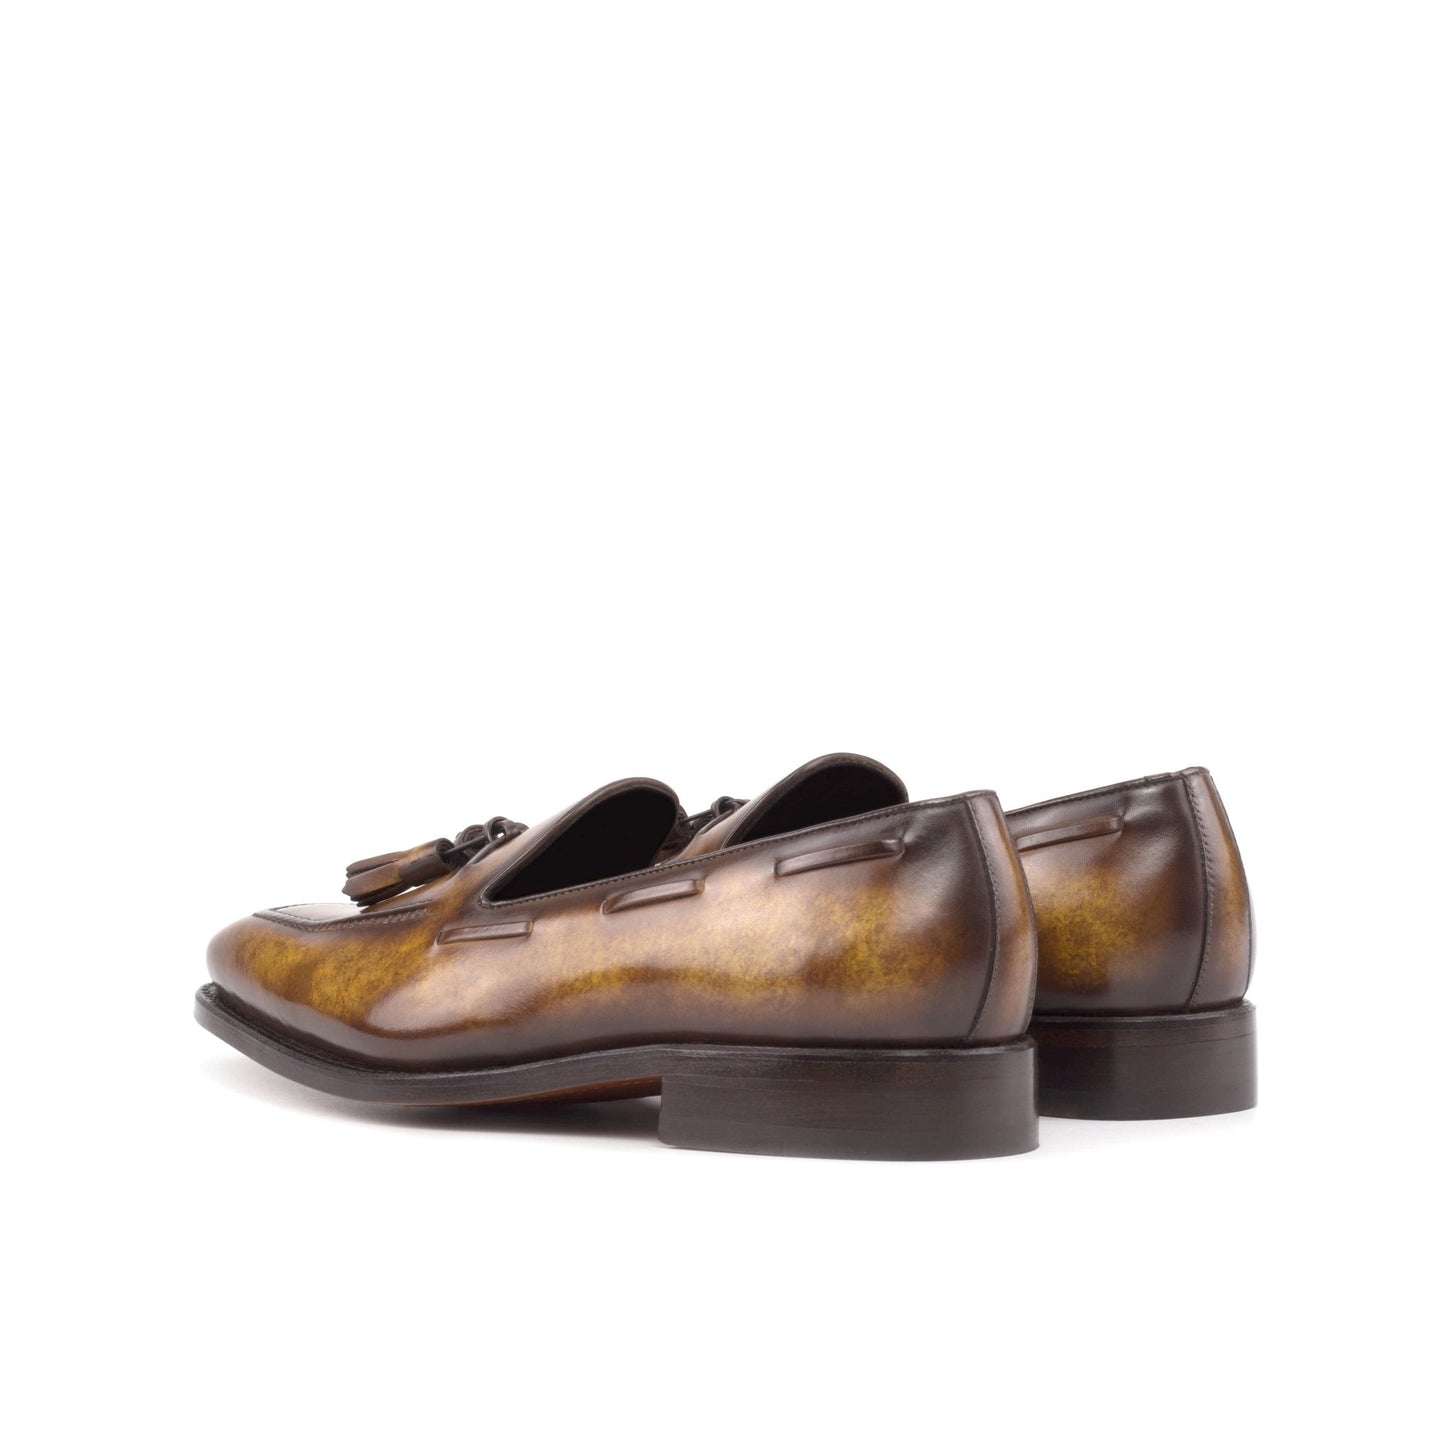 Tassel Loafer in Cognac Patina - Zatorres | Free Shipping on orders over $200